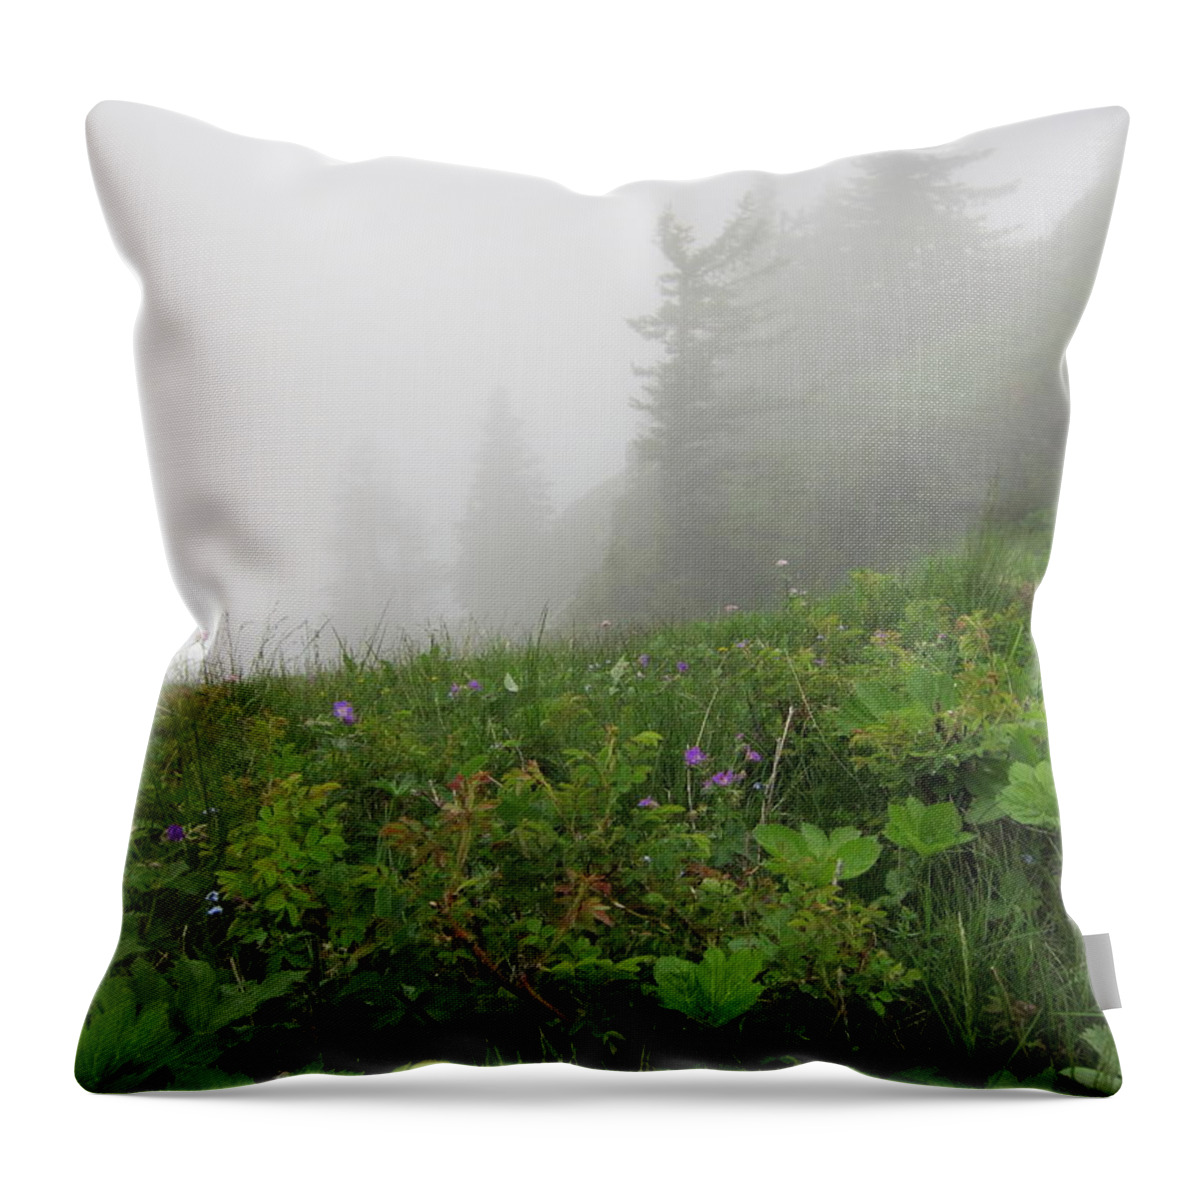 Mist Throw Pillow featuring the photograph In the Mist - 1 by Pema Hou